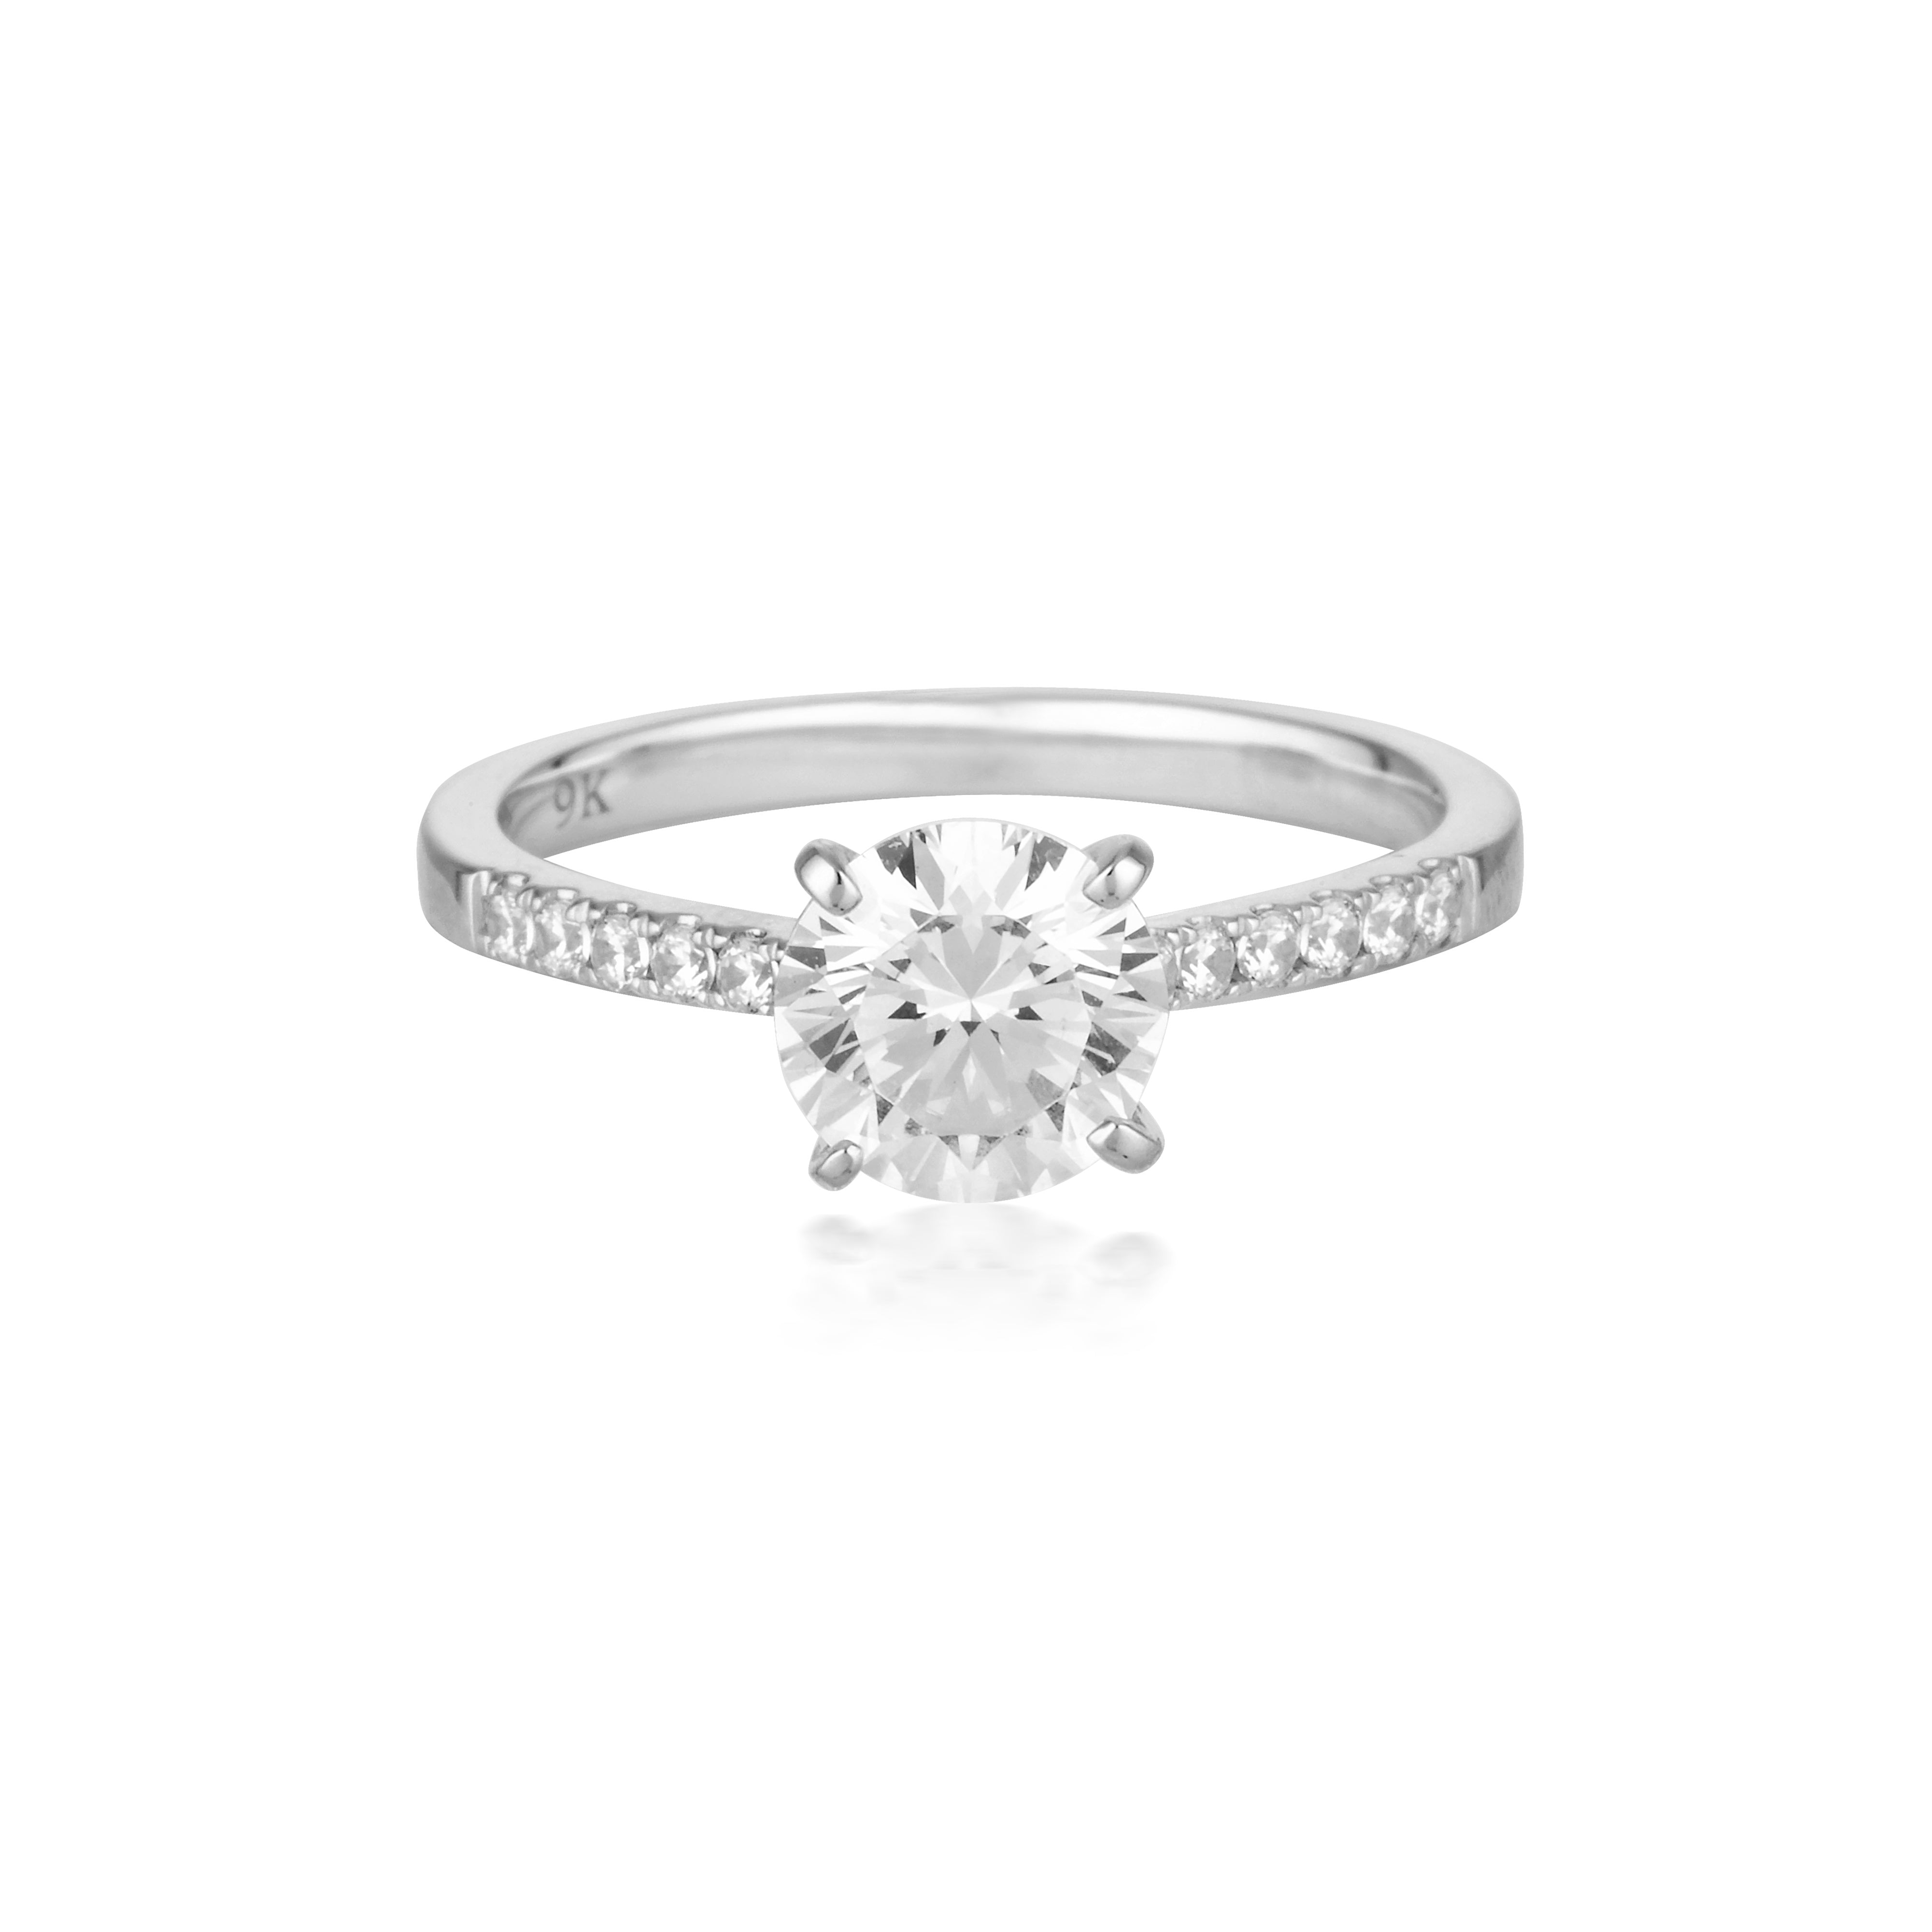 ROUND BRILLIANT CUT 1.25CTW MOISSANITE ENGAGEMENT RING IN 9CT WHITE GOLD